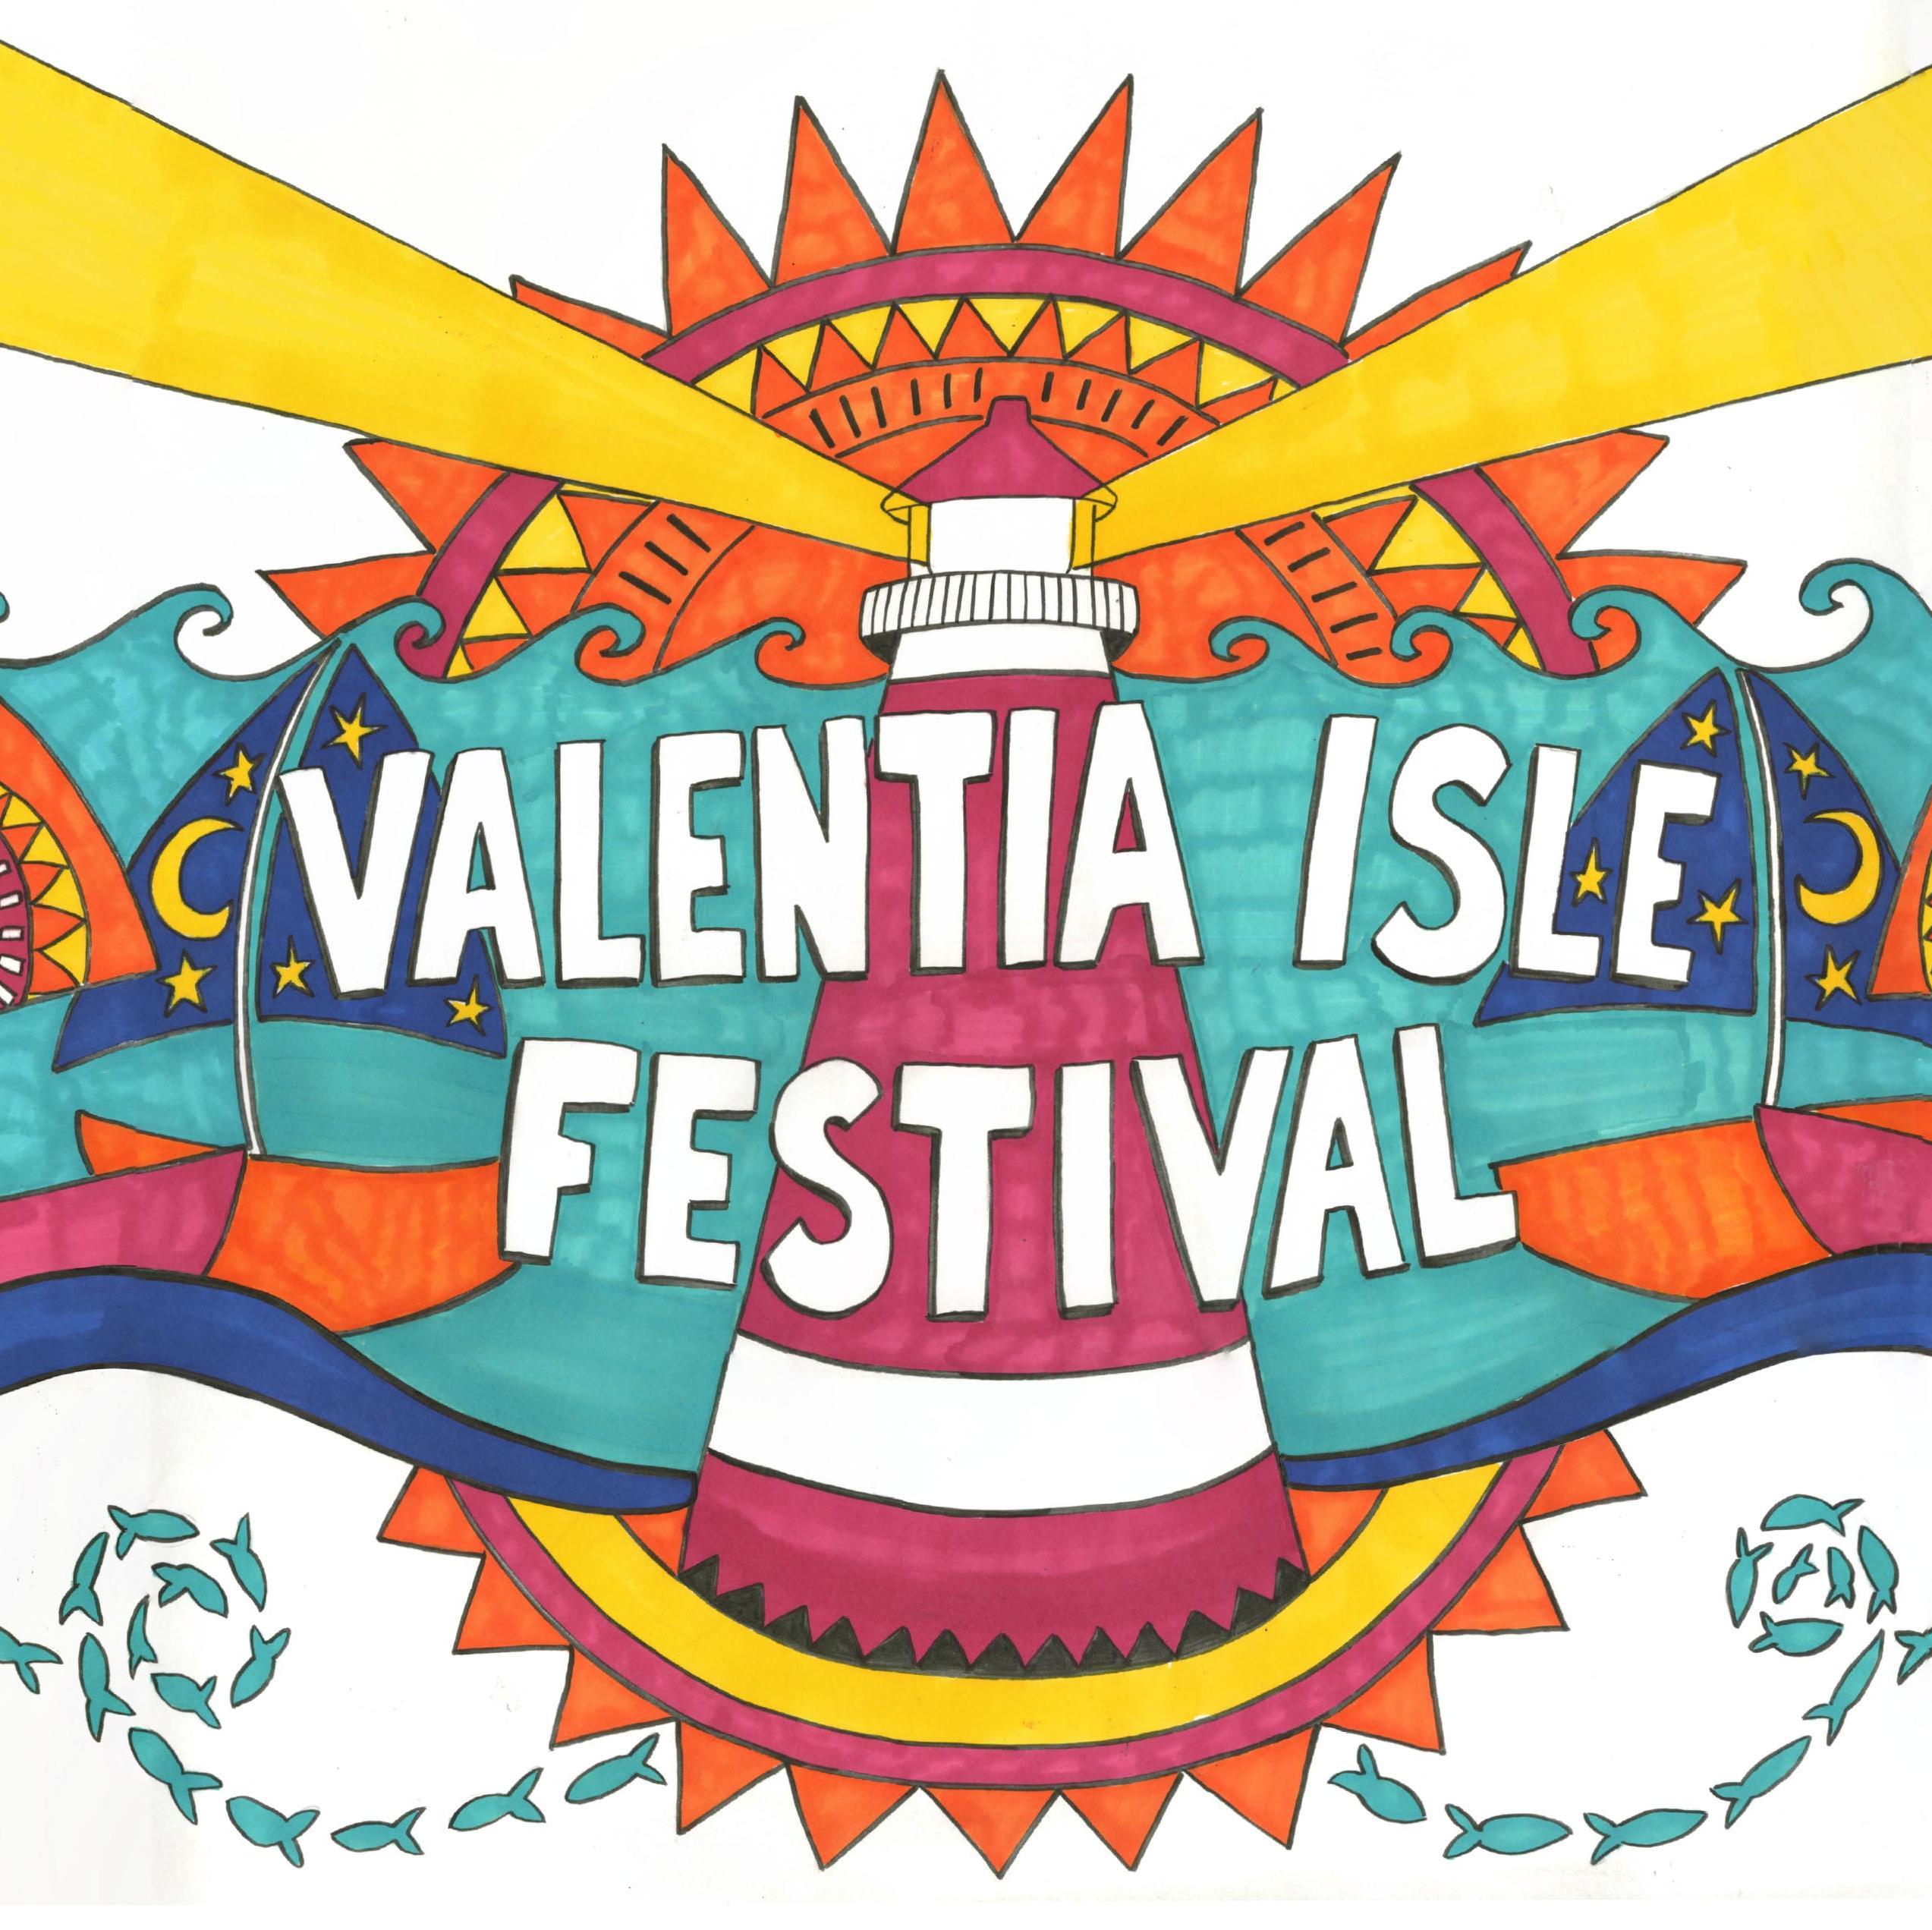 Art, Culture, Food, Spoken word and Music Festival set on Valentia  Island over-looking the Skellig Rocks in a Dark Sky Reserve on the Wild Atlantic Way.